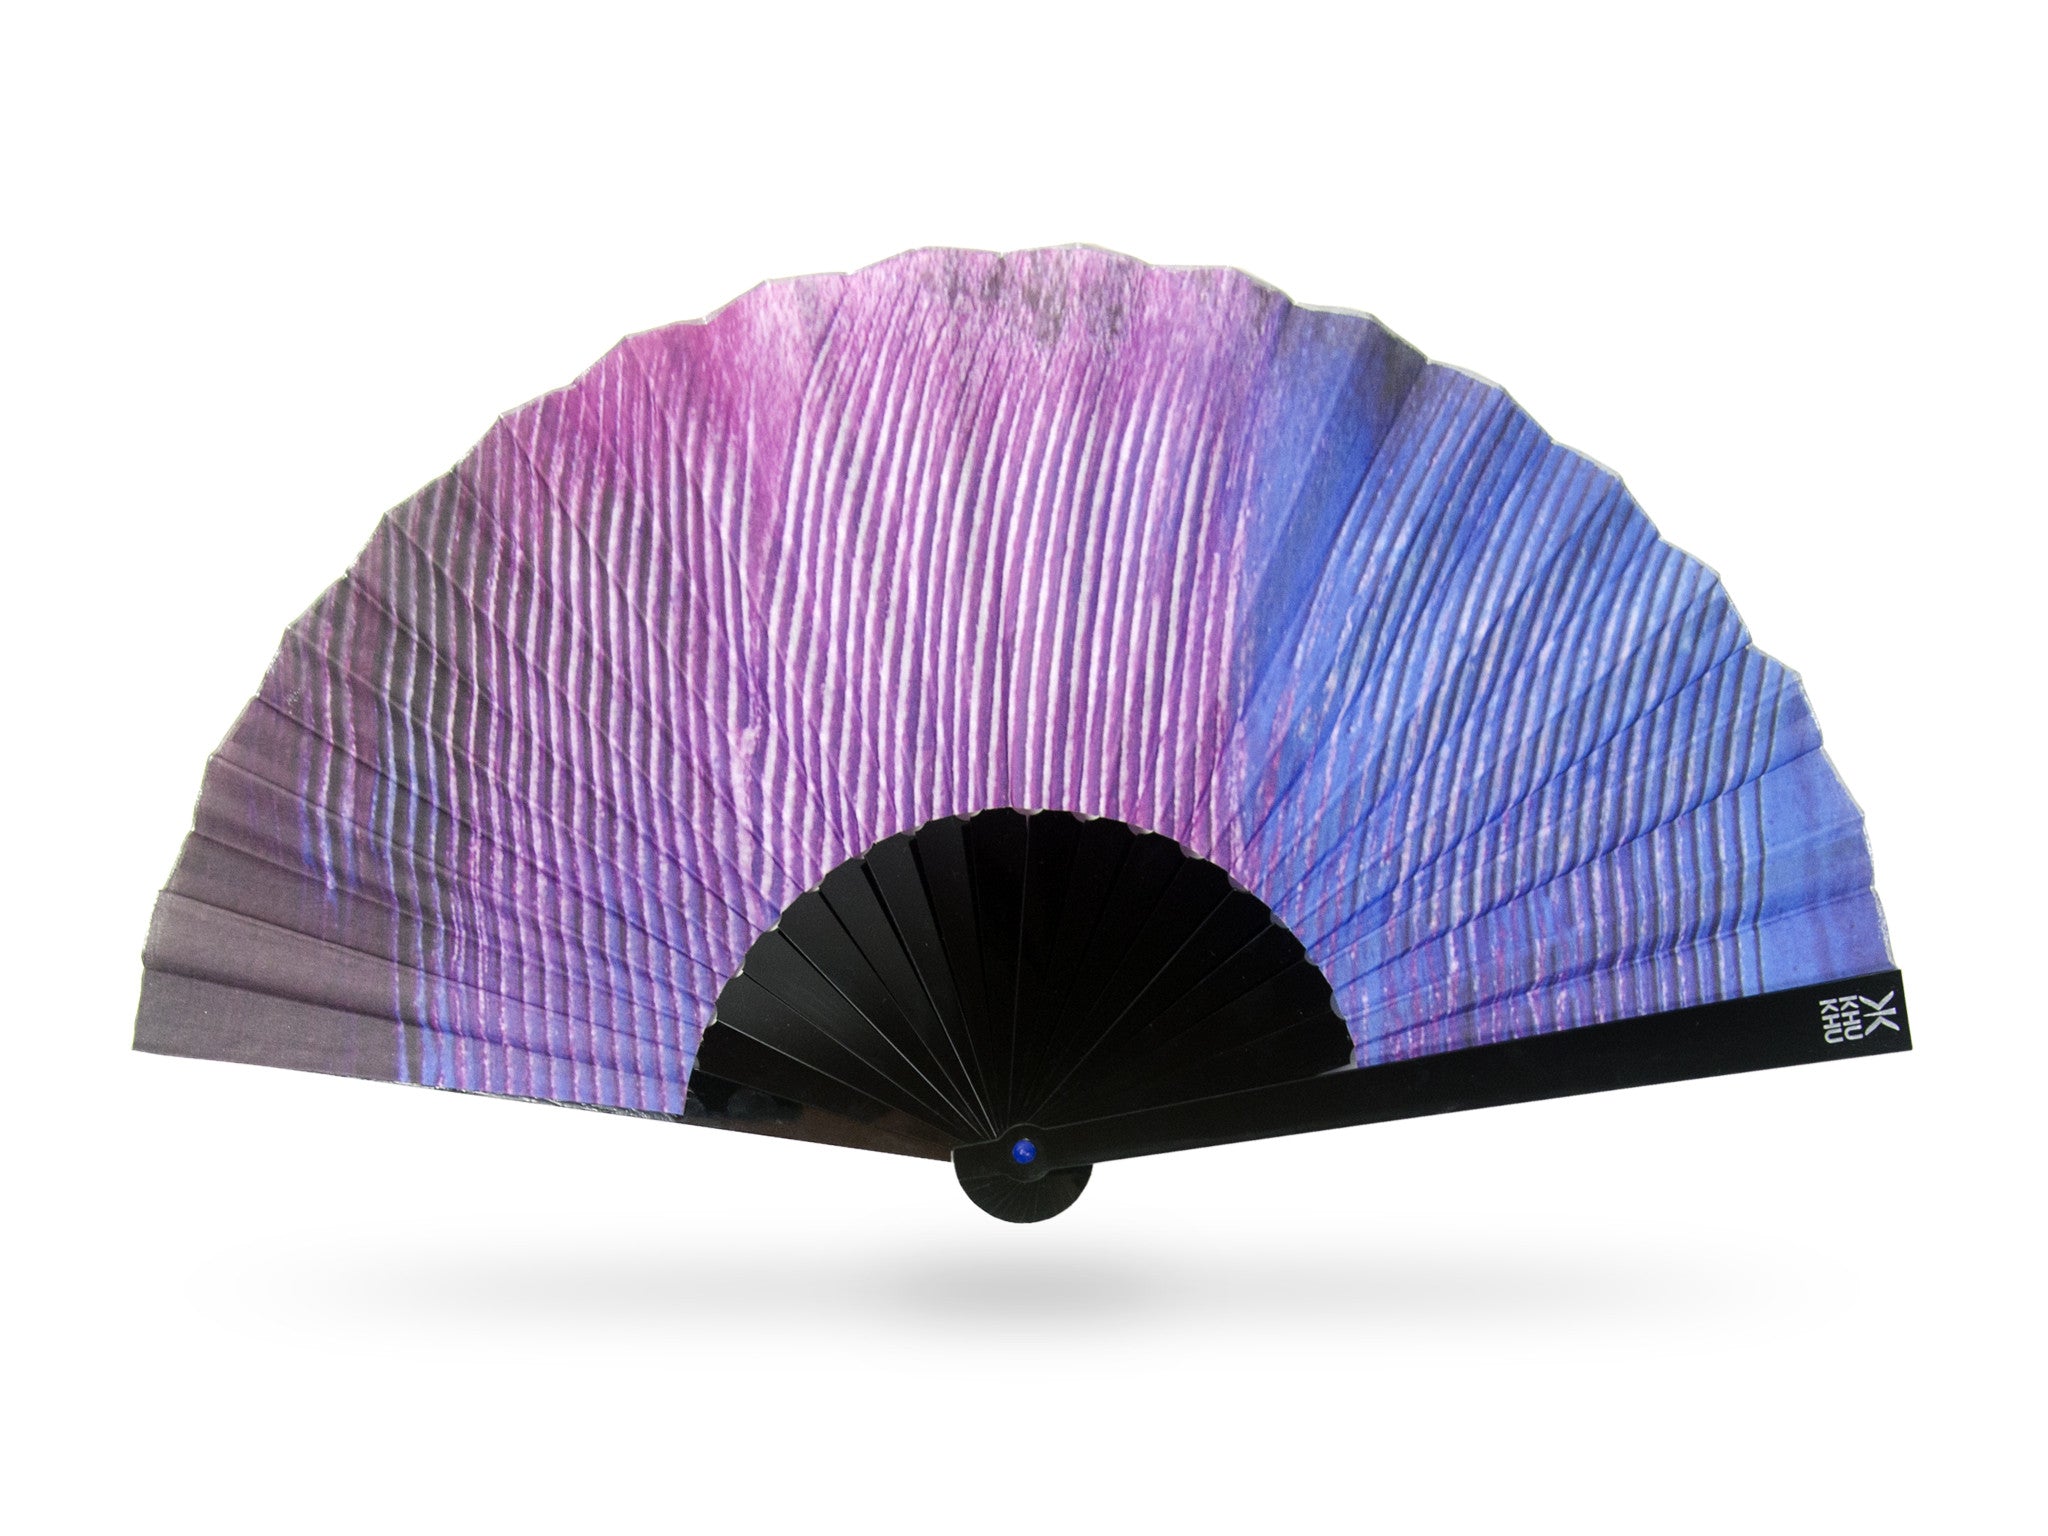 Khu Khu Premium Cotinga Tropical Bird Wing Print Hand-Fan in purple and blue tones. Painted and then printed onto high grade cotton with swiss acrylic bespoke shape sticks. Blue rivet and silver rim. Engraved logo. 